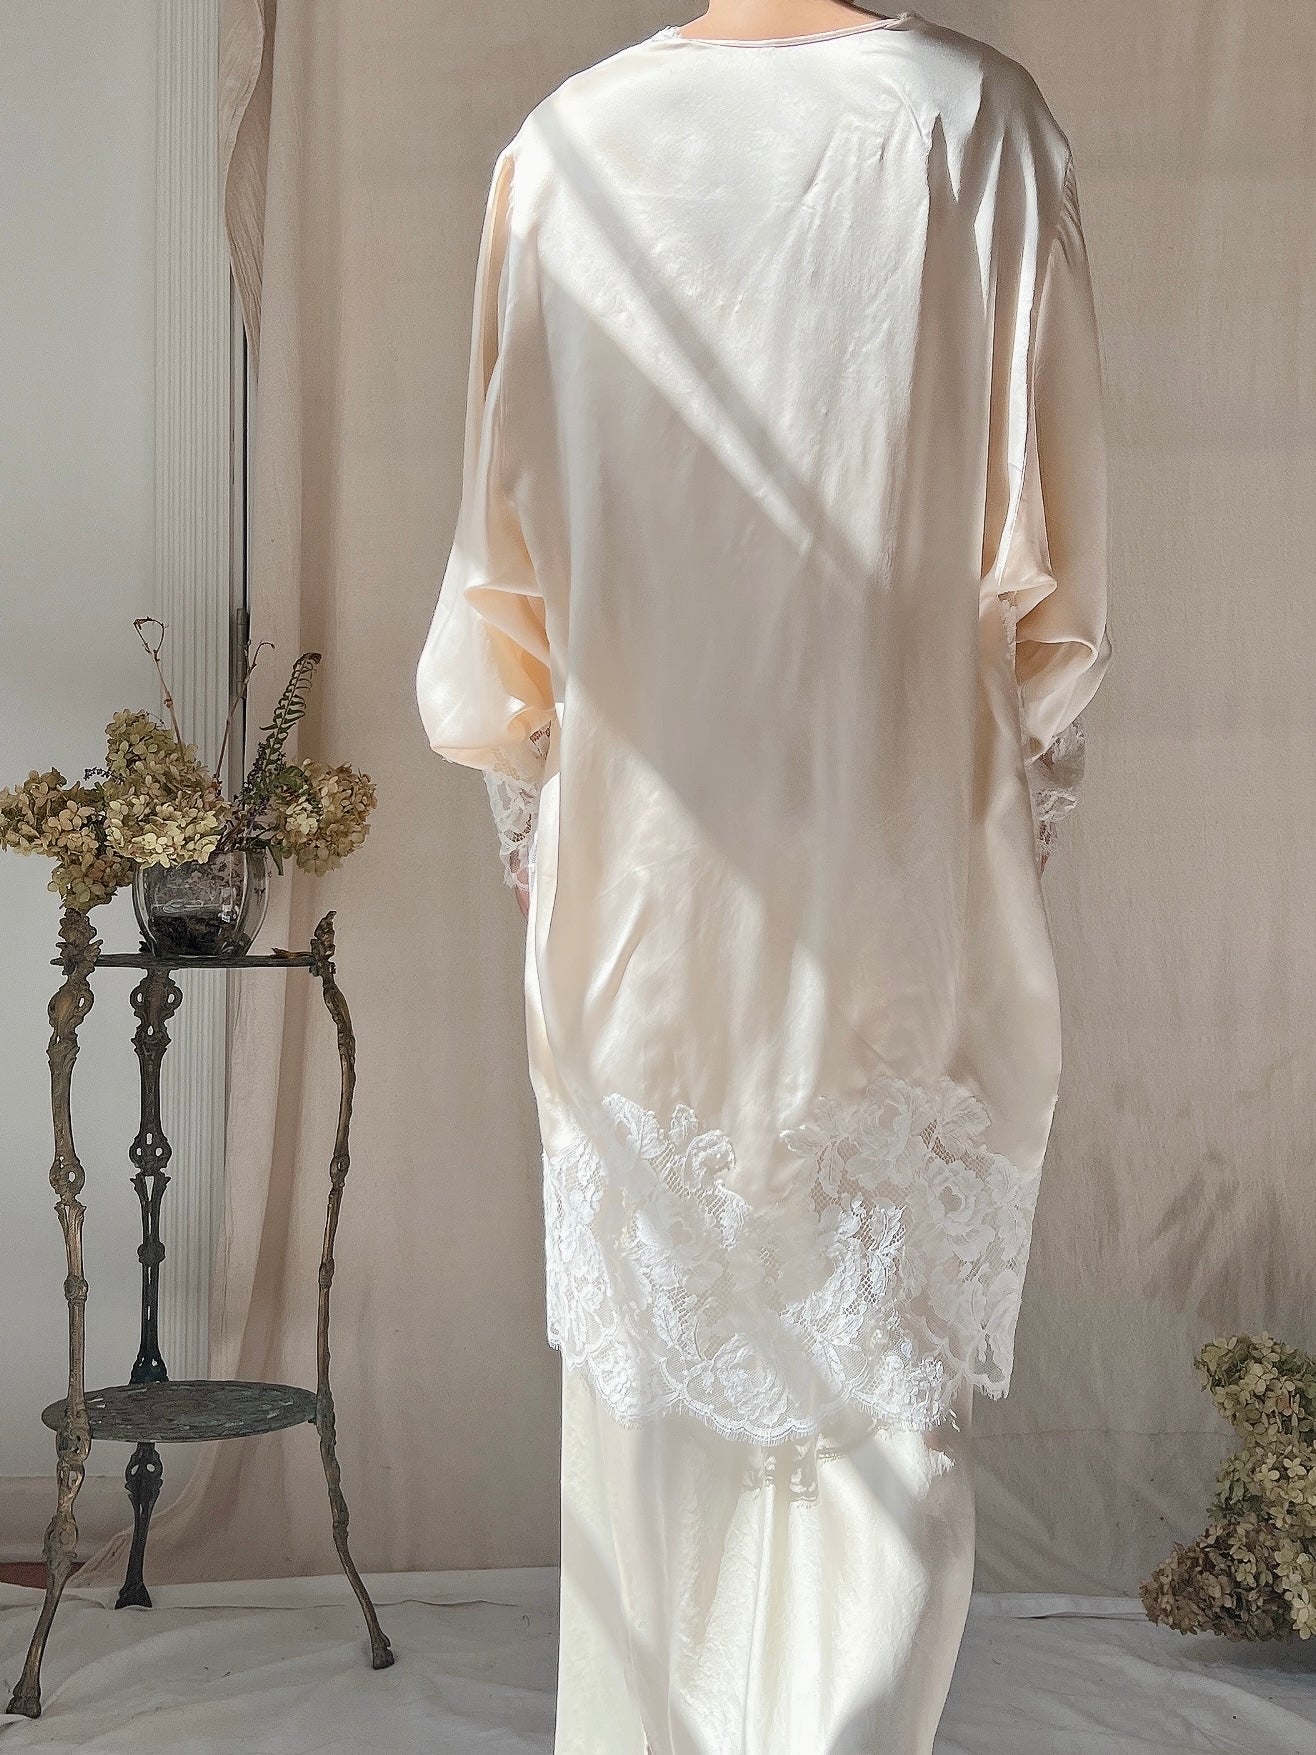 1980s Silk Lace Cocoon Duster - OSFM